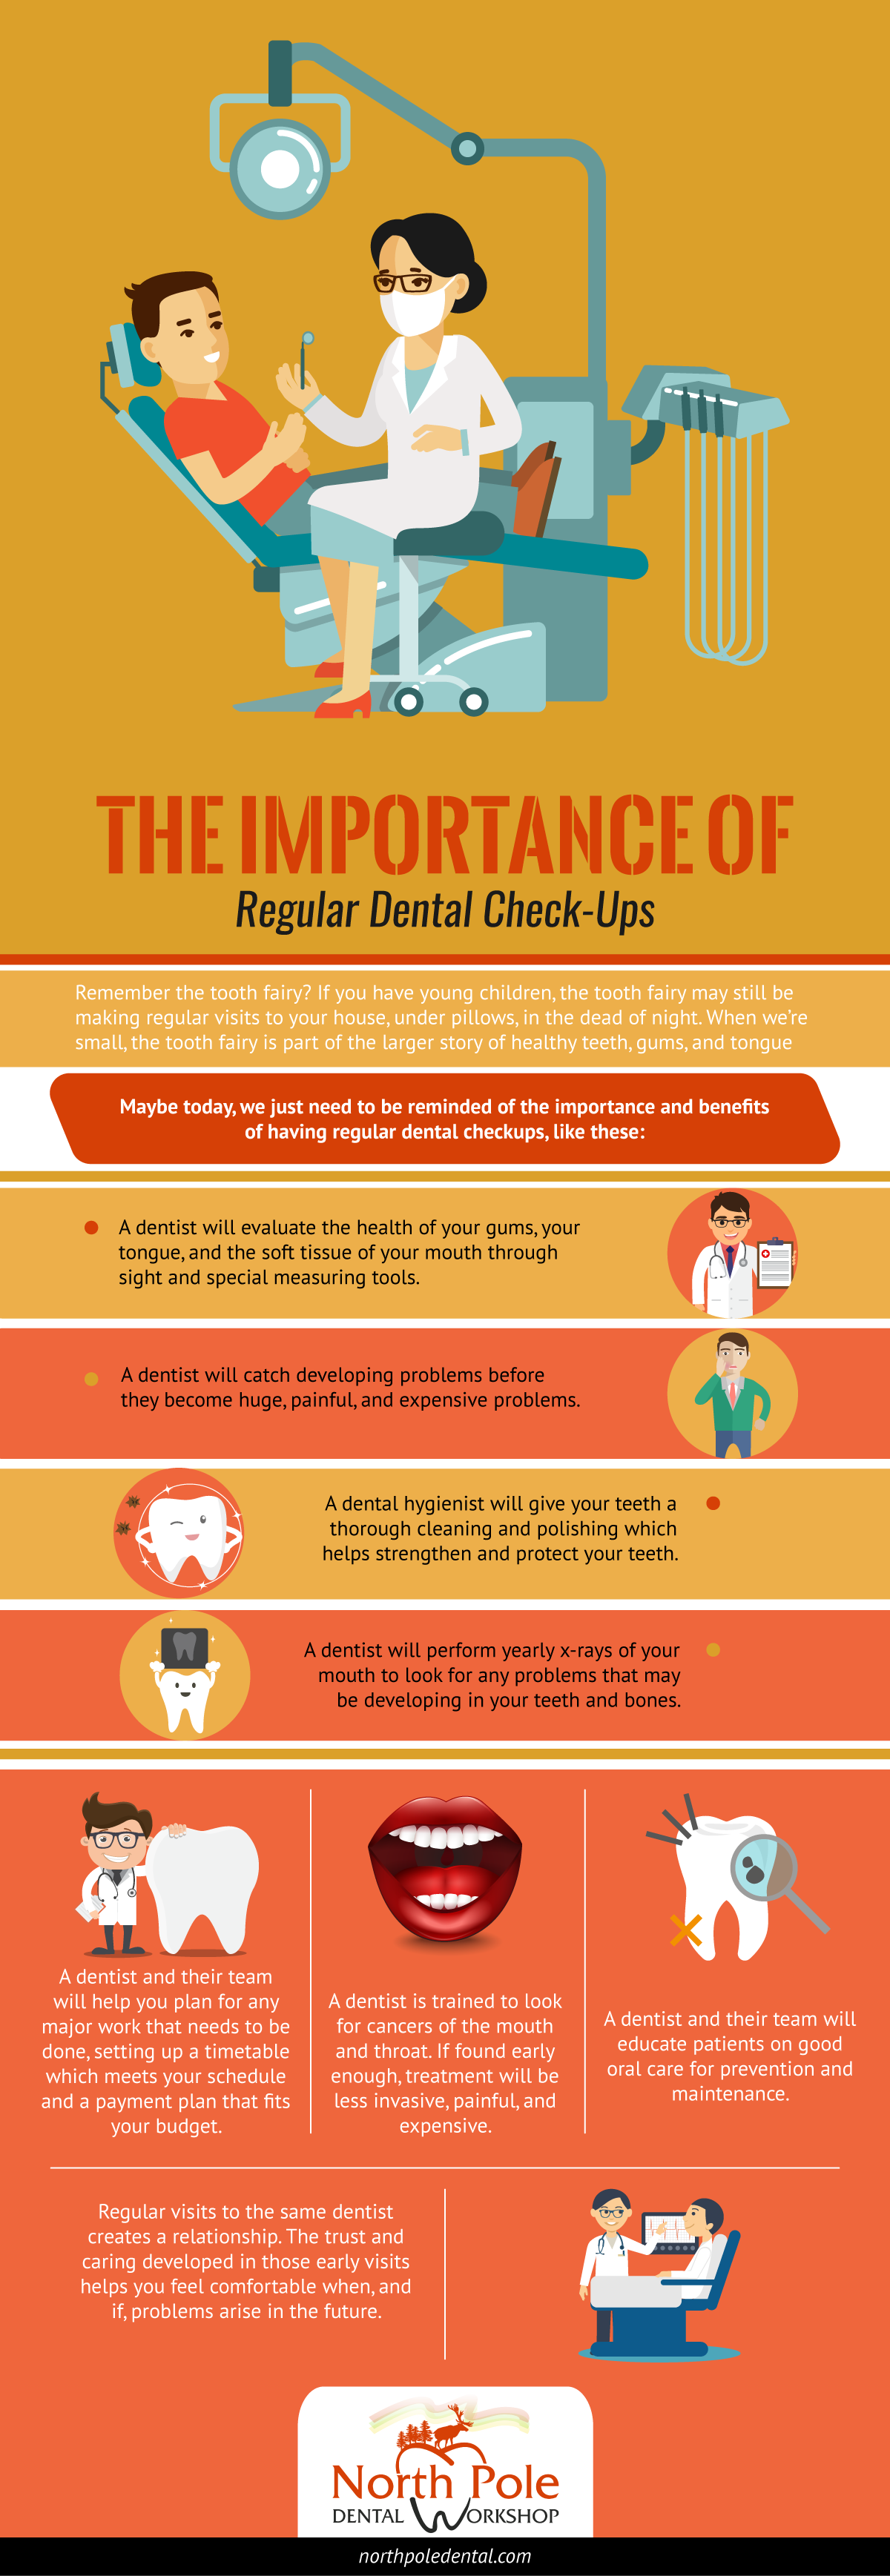 Why Regular Dental Checkups are Important: Tips for Finding a Dentist Near You